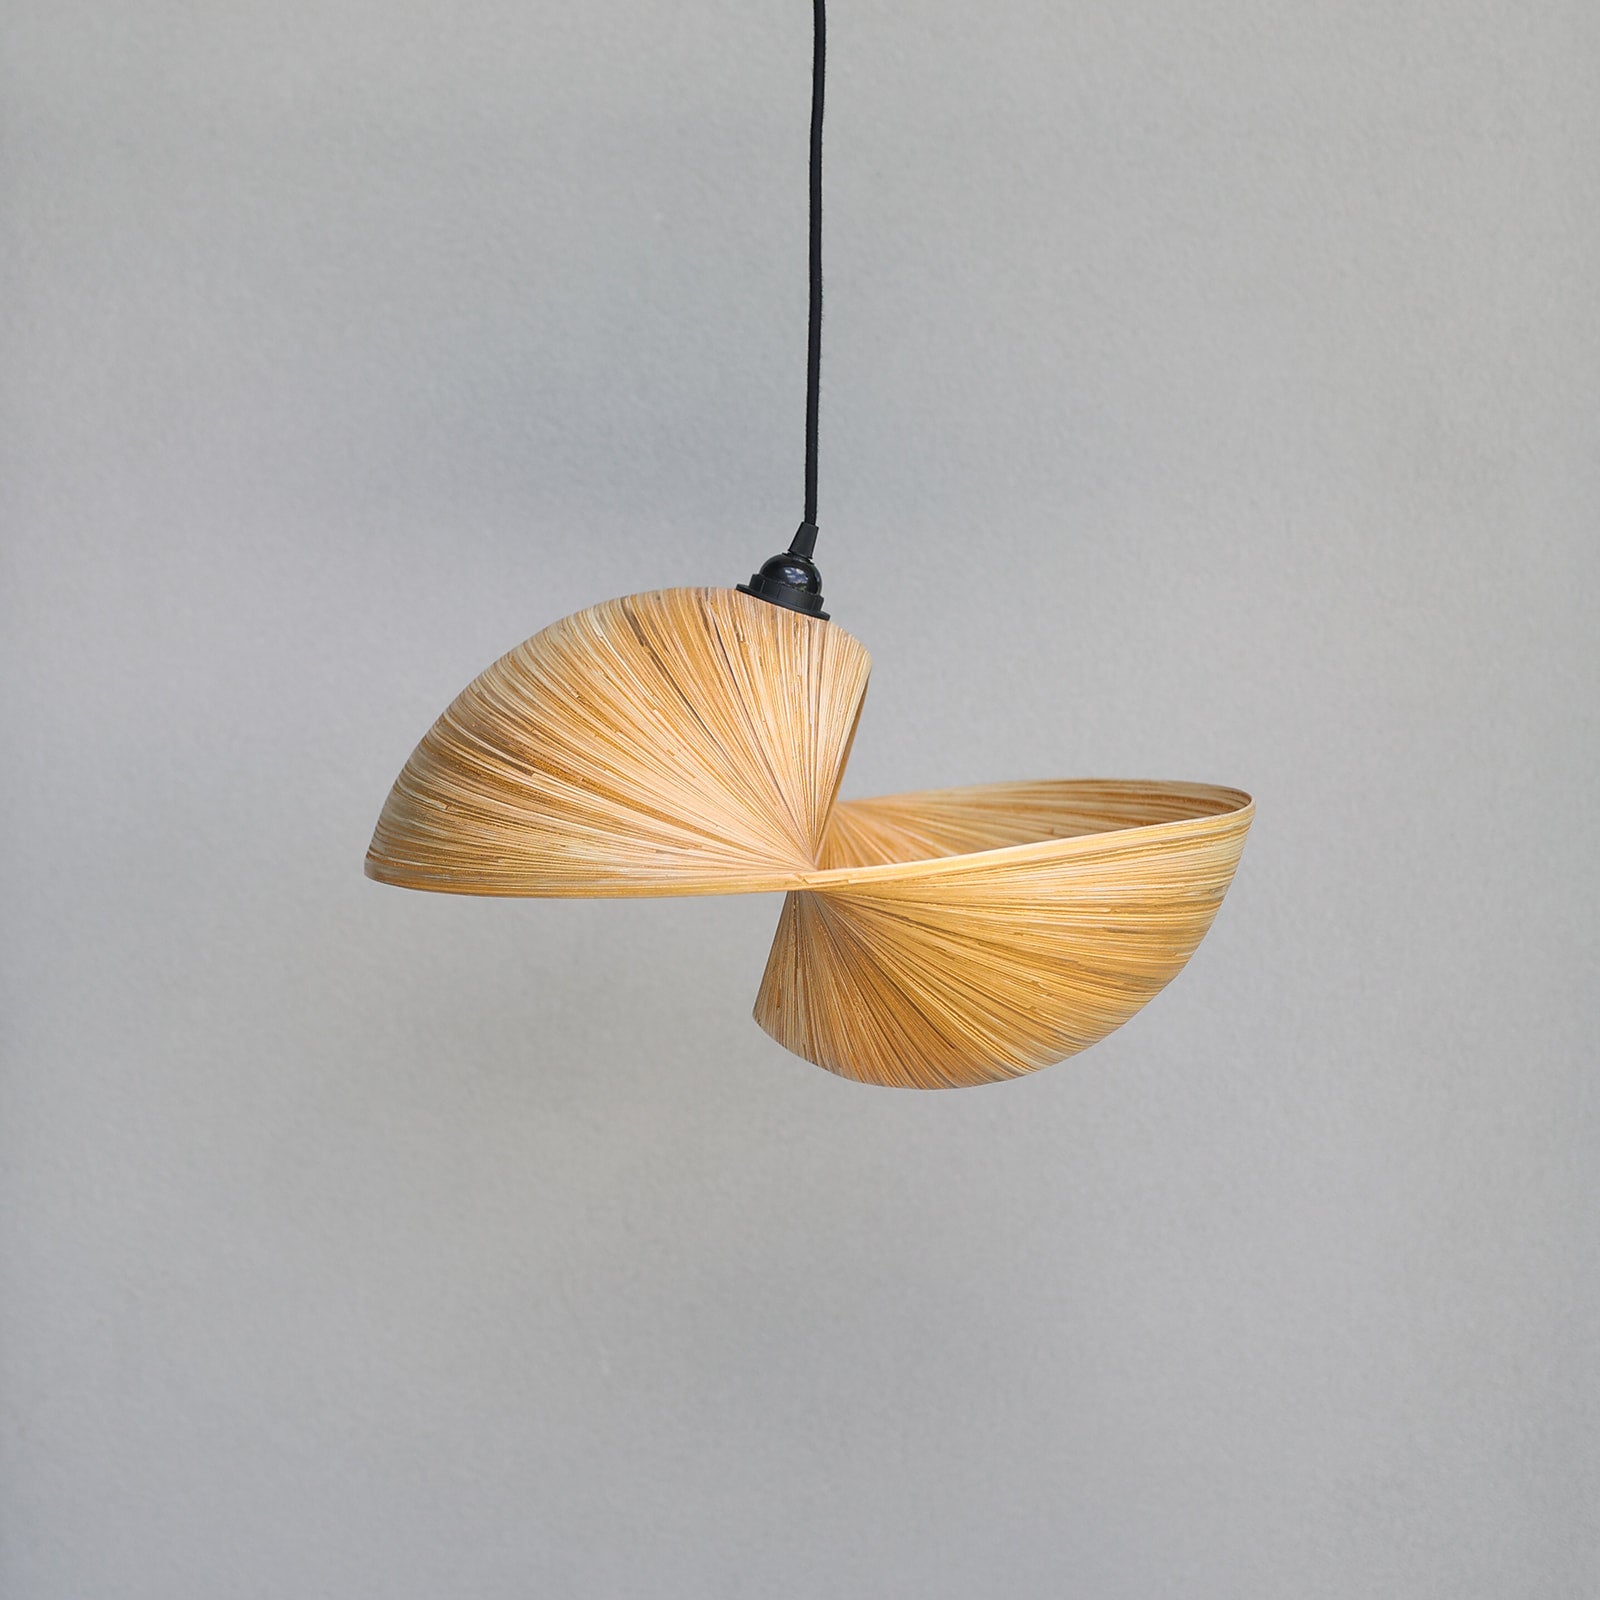 medium-bamboo-pendant-light-shade-made-from-thin-strips-of-bamboo-to-look-like-a-shell